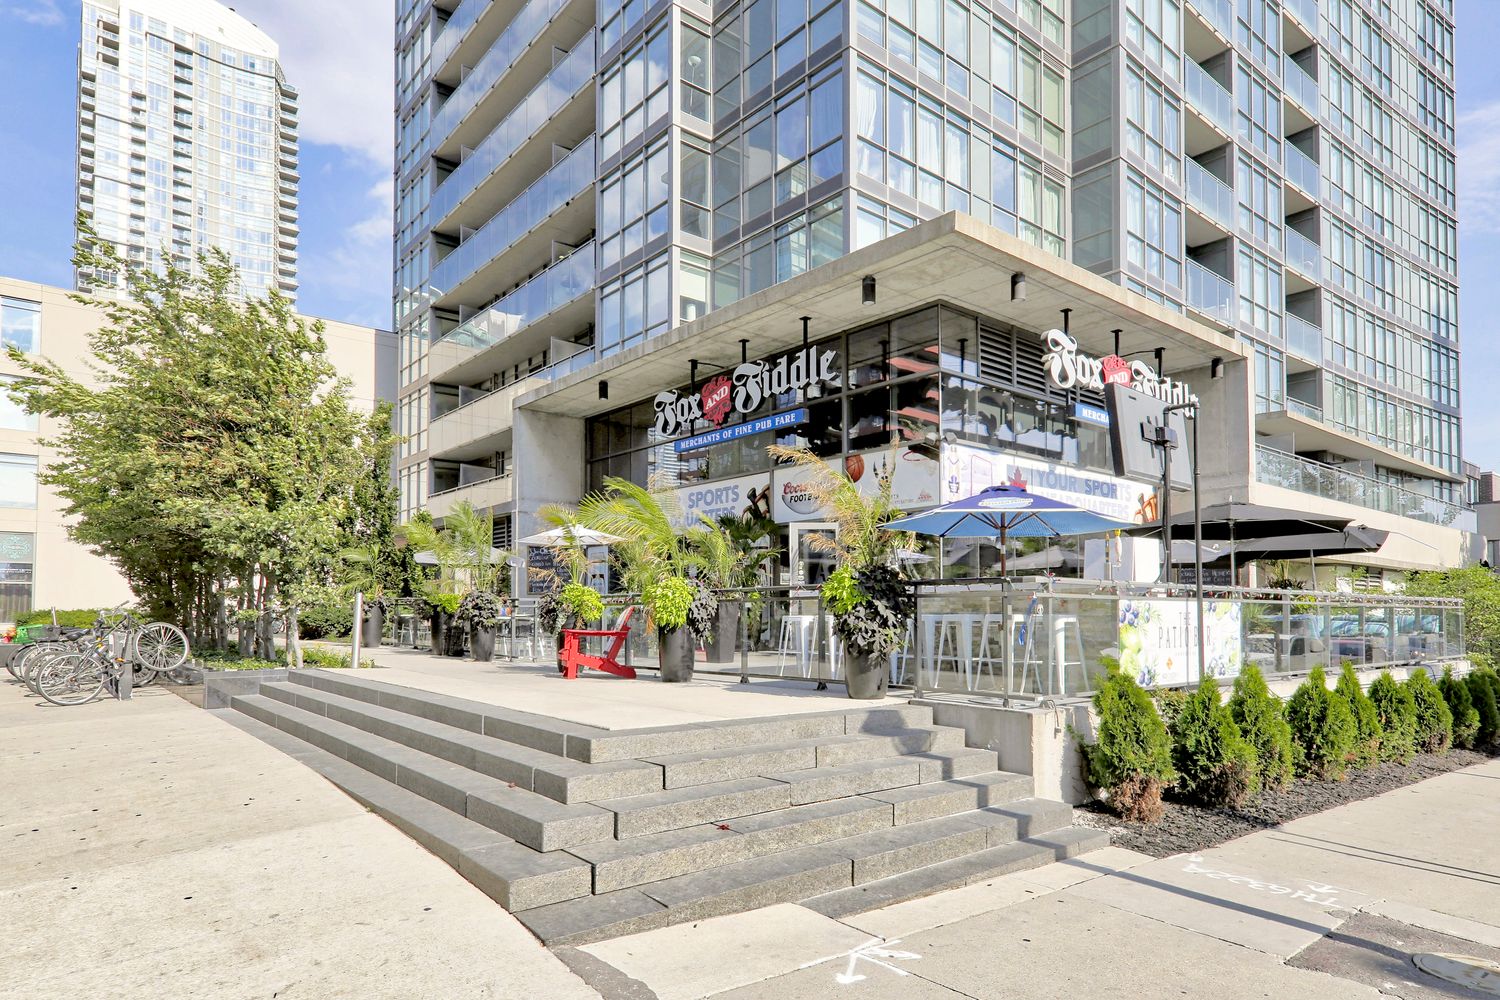 15 Fort York Boulevard. N1 | N2 Condos - City Place is located in  Downtown, Toronto - image #5 of 5